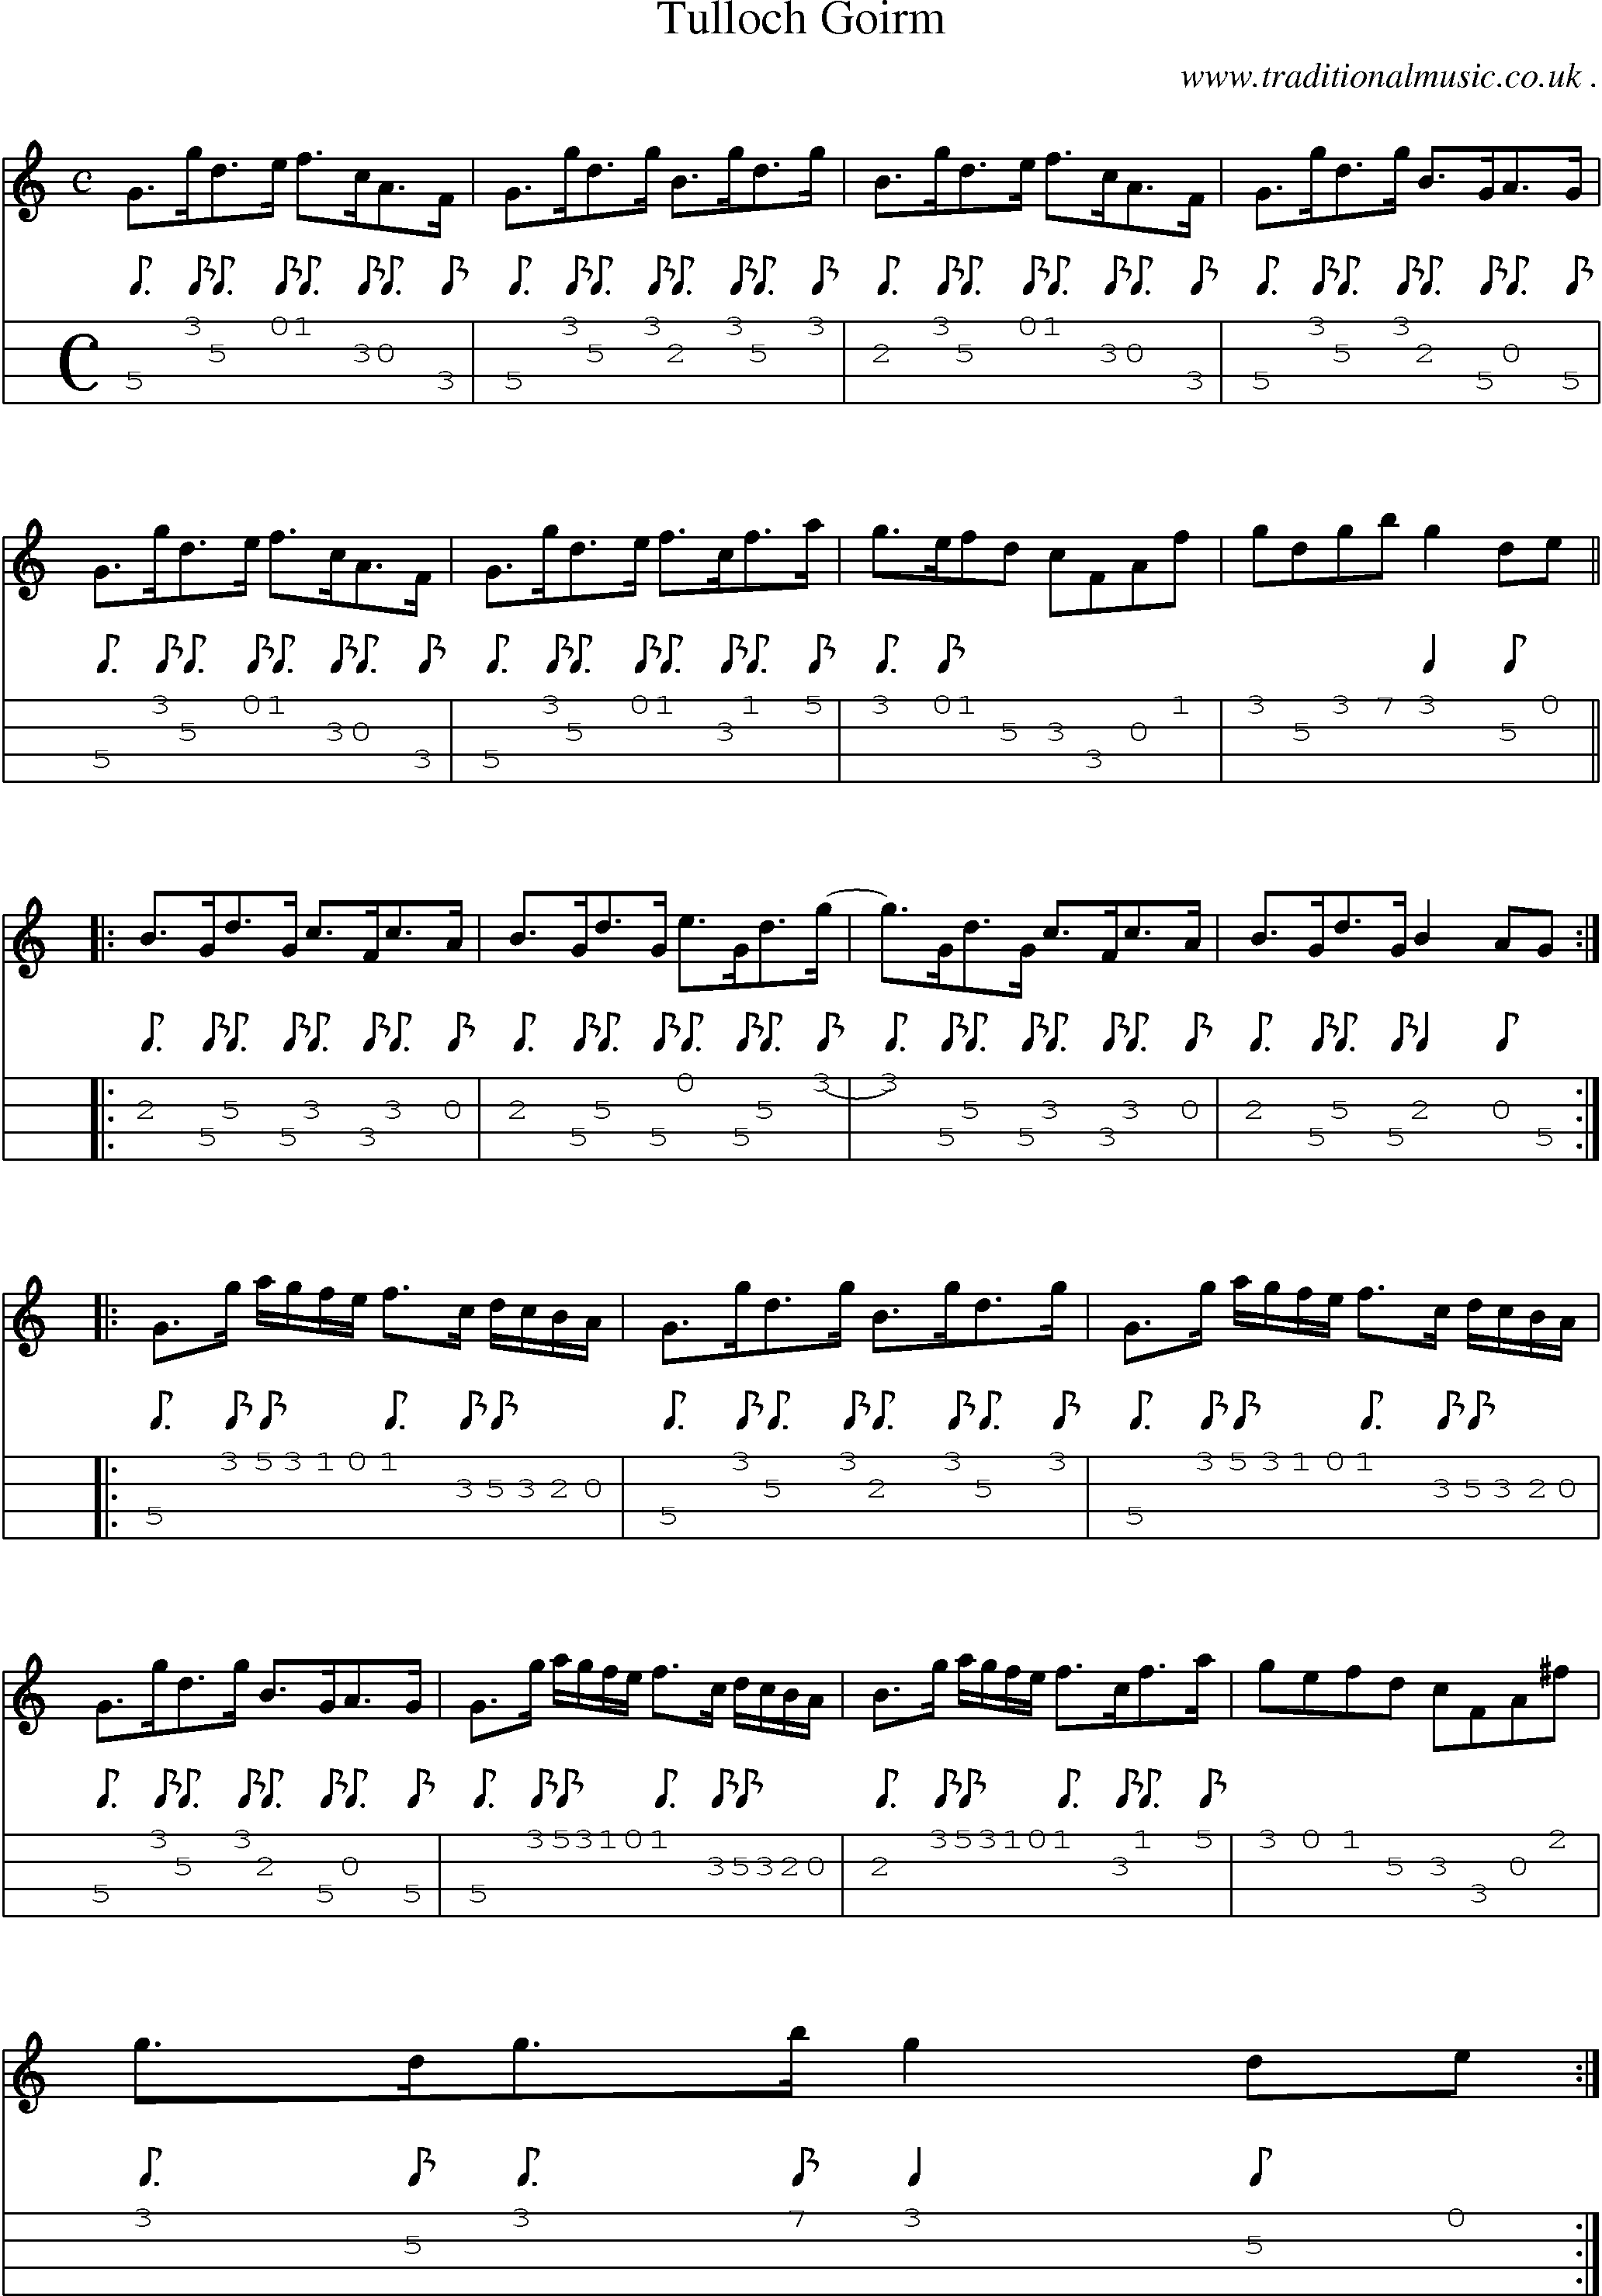 Sheet-music  score, Chords and Mandolin Tabs for Tulloch Goirm